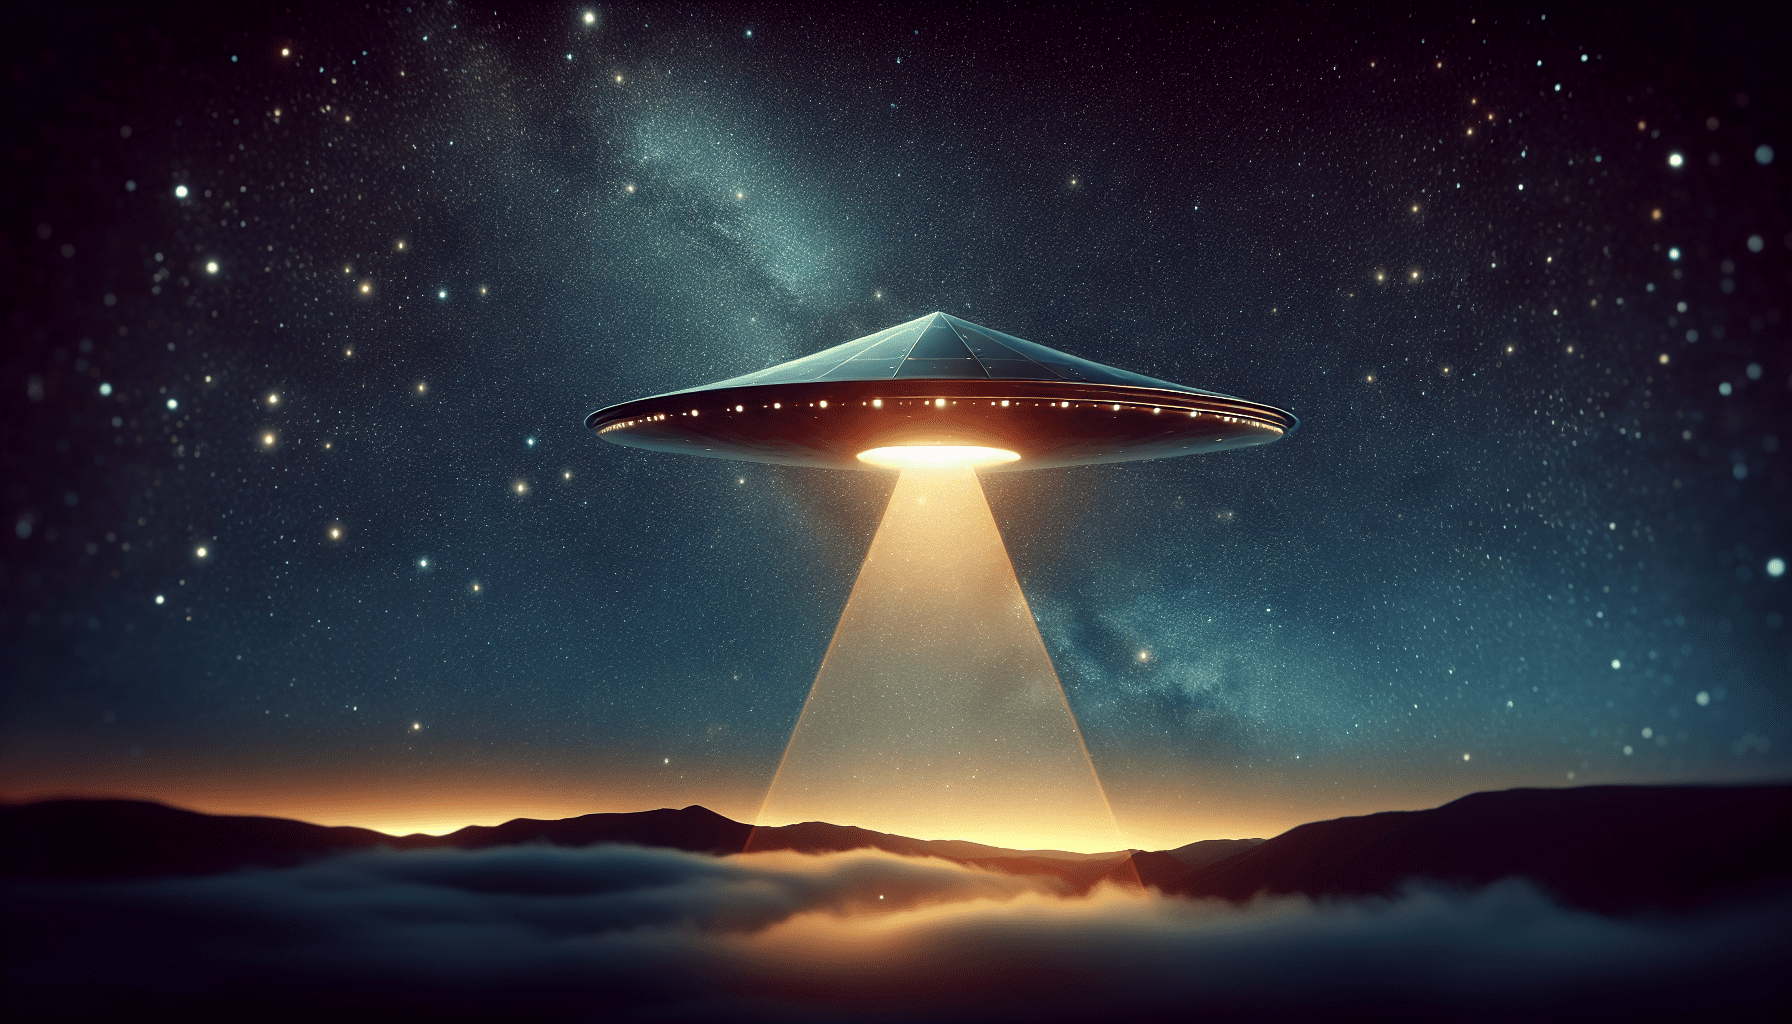 How To Educate Others About The Existence Of UFOs